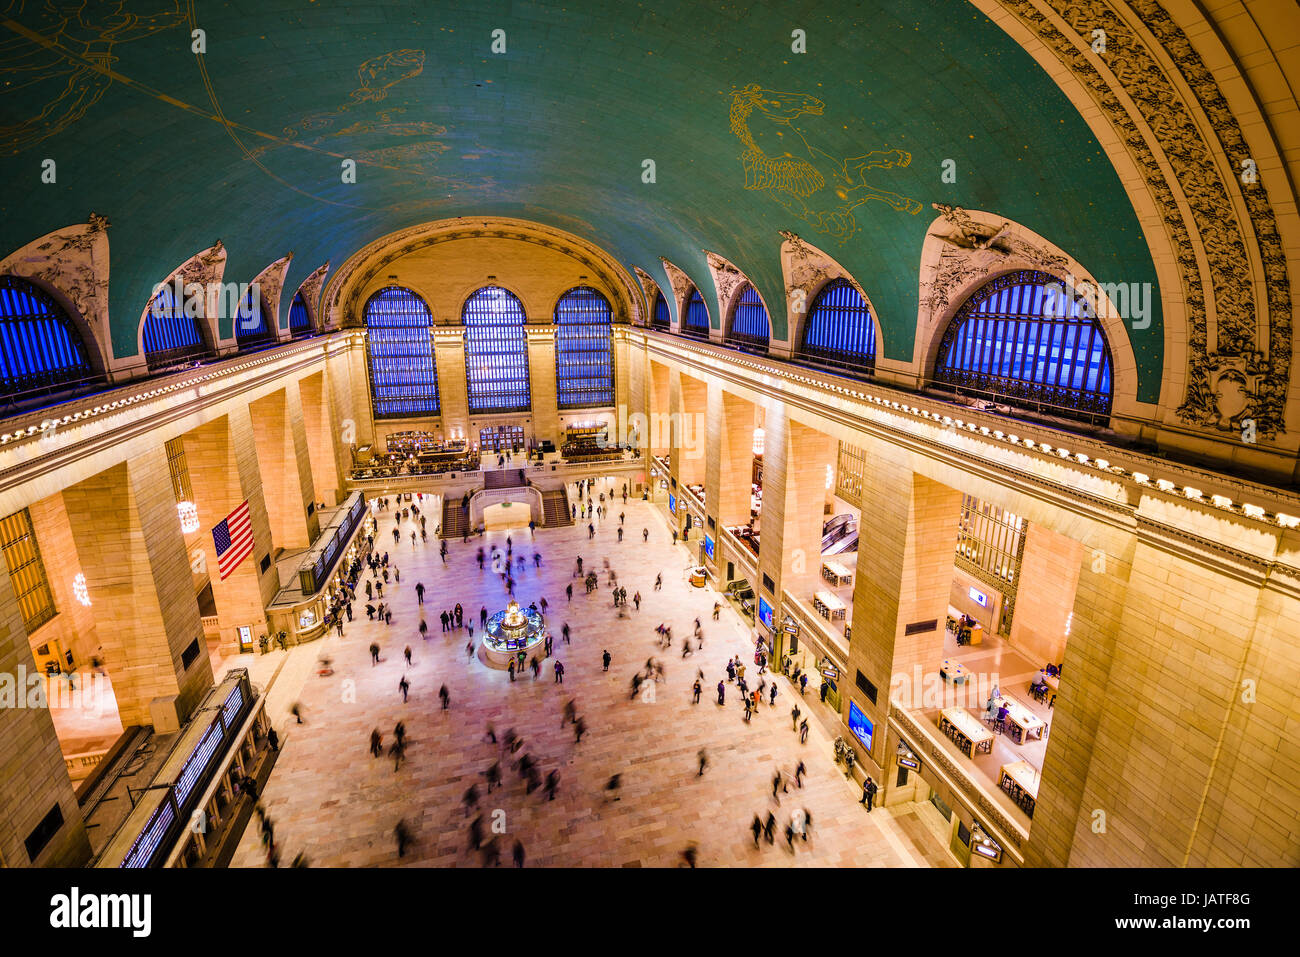 NEW YORK CITY - OCTOBER 28, 2016: Interior view of the main concourse at historic Grand central Terminal. Stock Photo